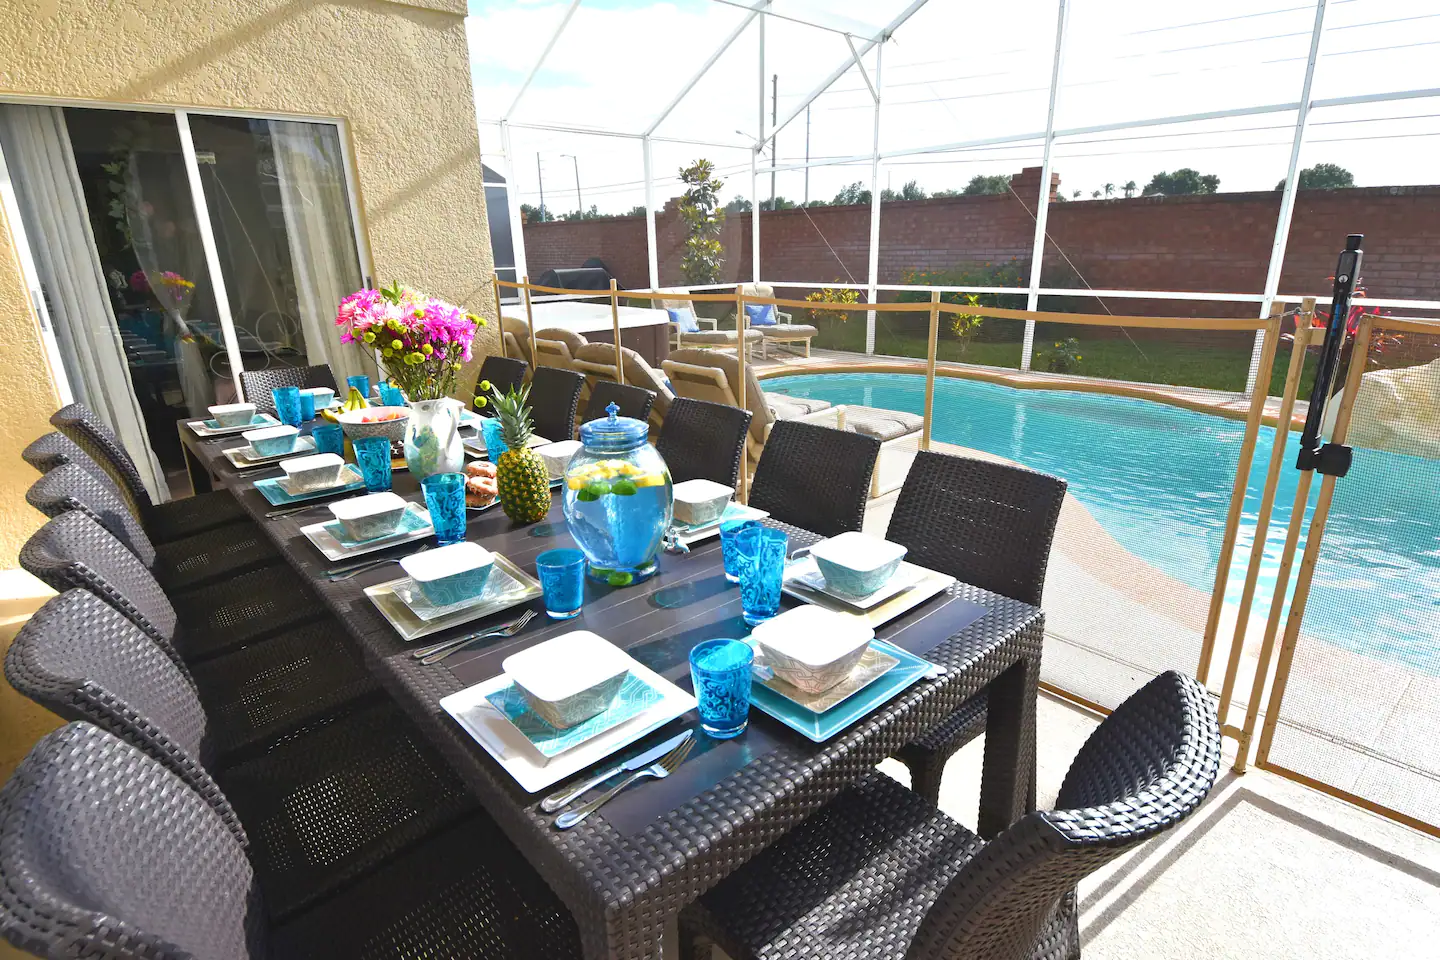 Outdoor melamine dinnerware and an extended poolside dining table for 12 people